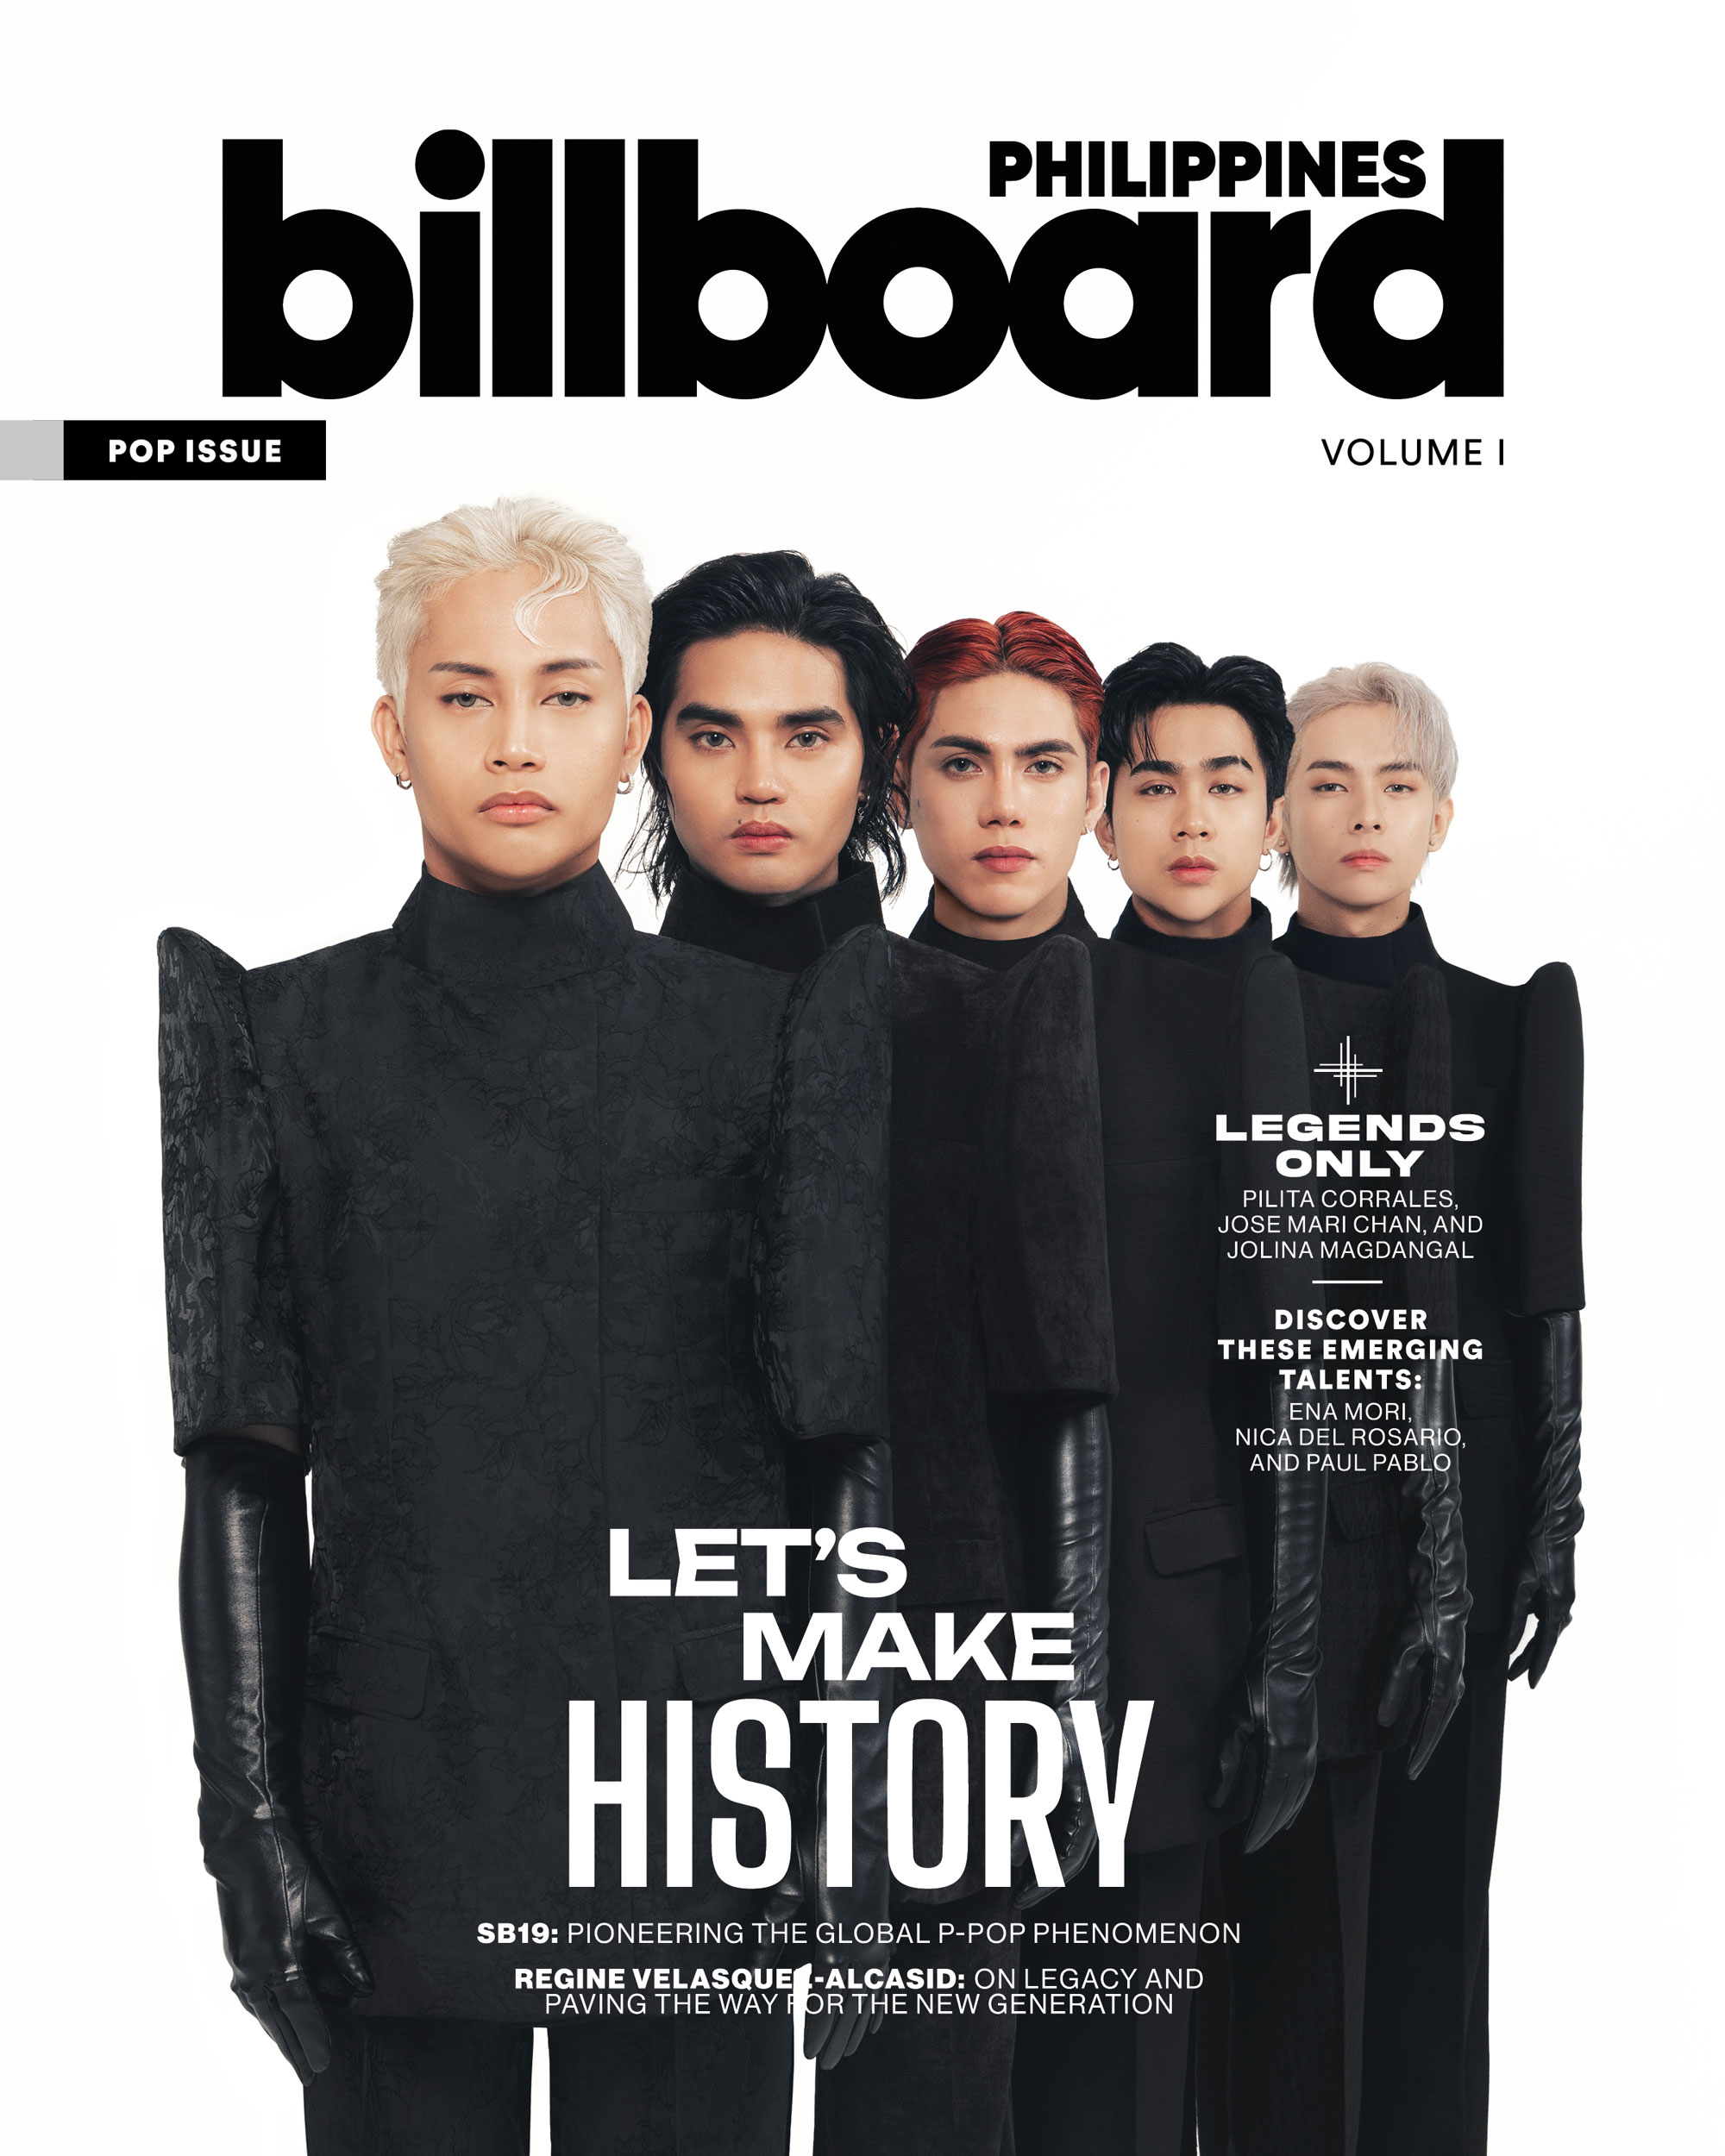 Billboard Philippines' first-ever print cover personality: The hottest group in the country today with viral hits and currently vying for a Grammy nomination for Best Pop Duo/Group Performance—P-pop trailblazers SB19.